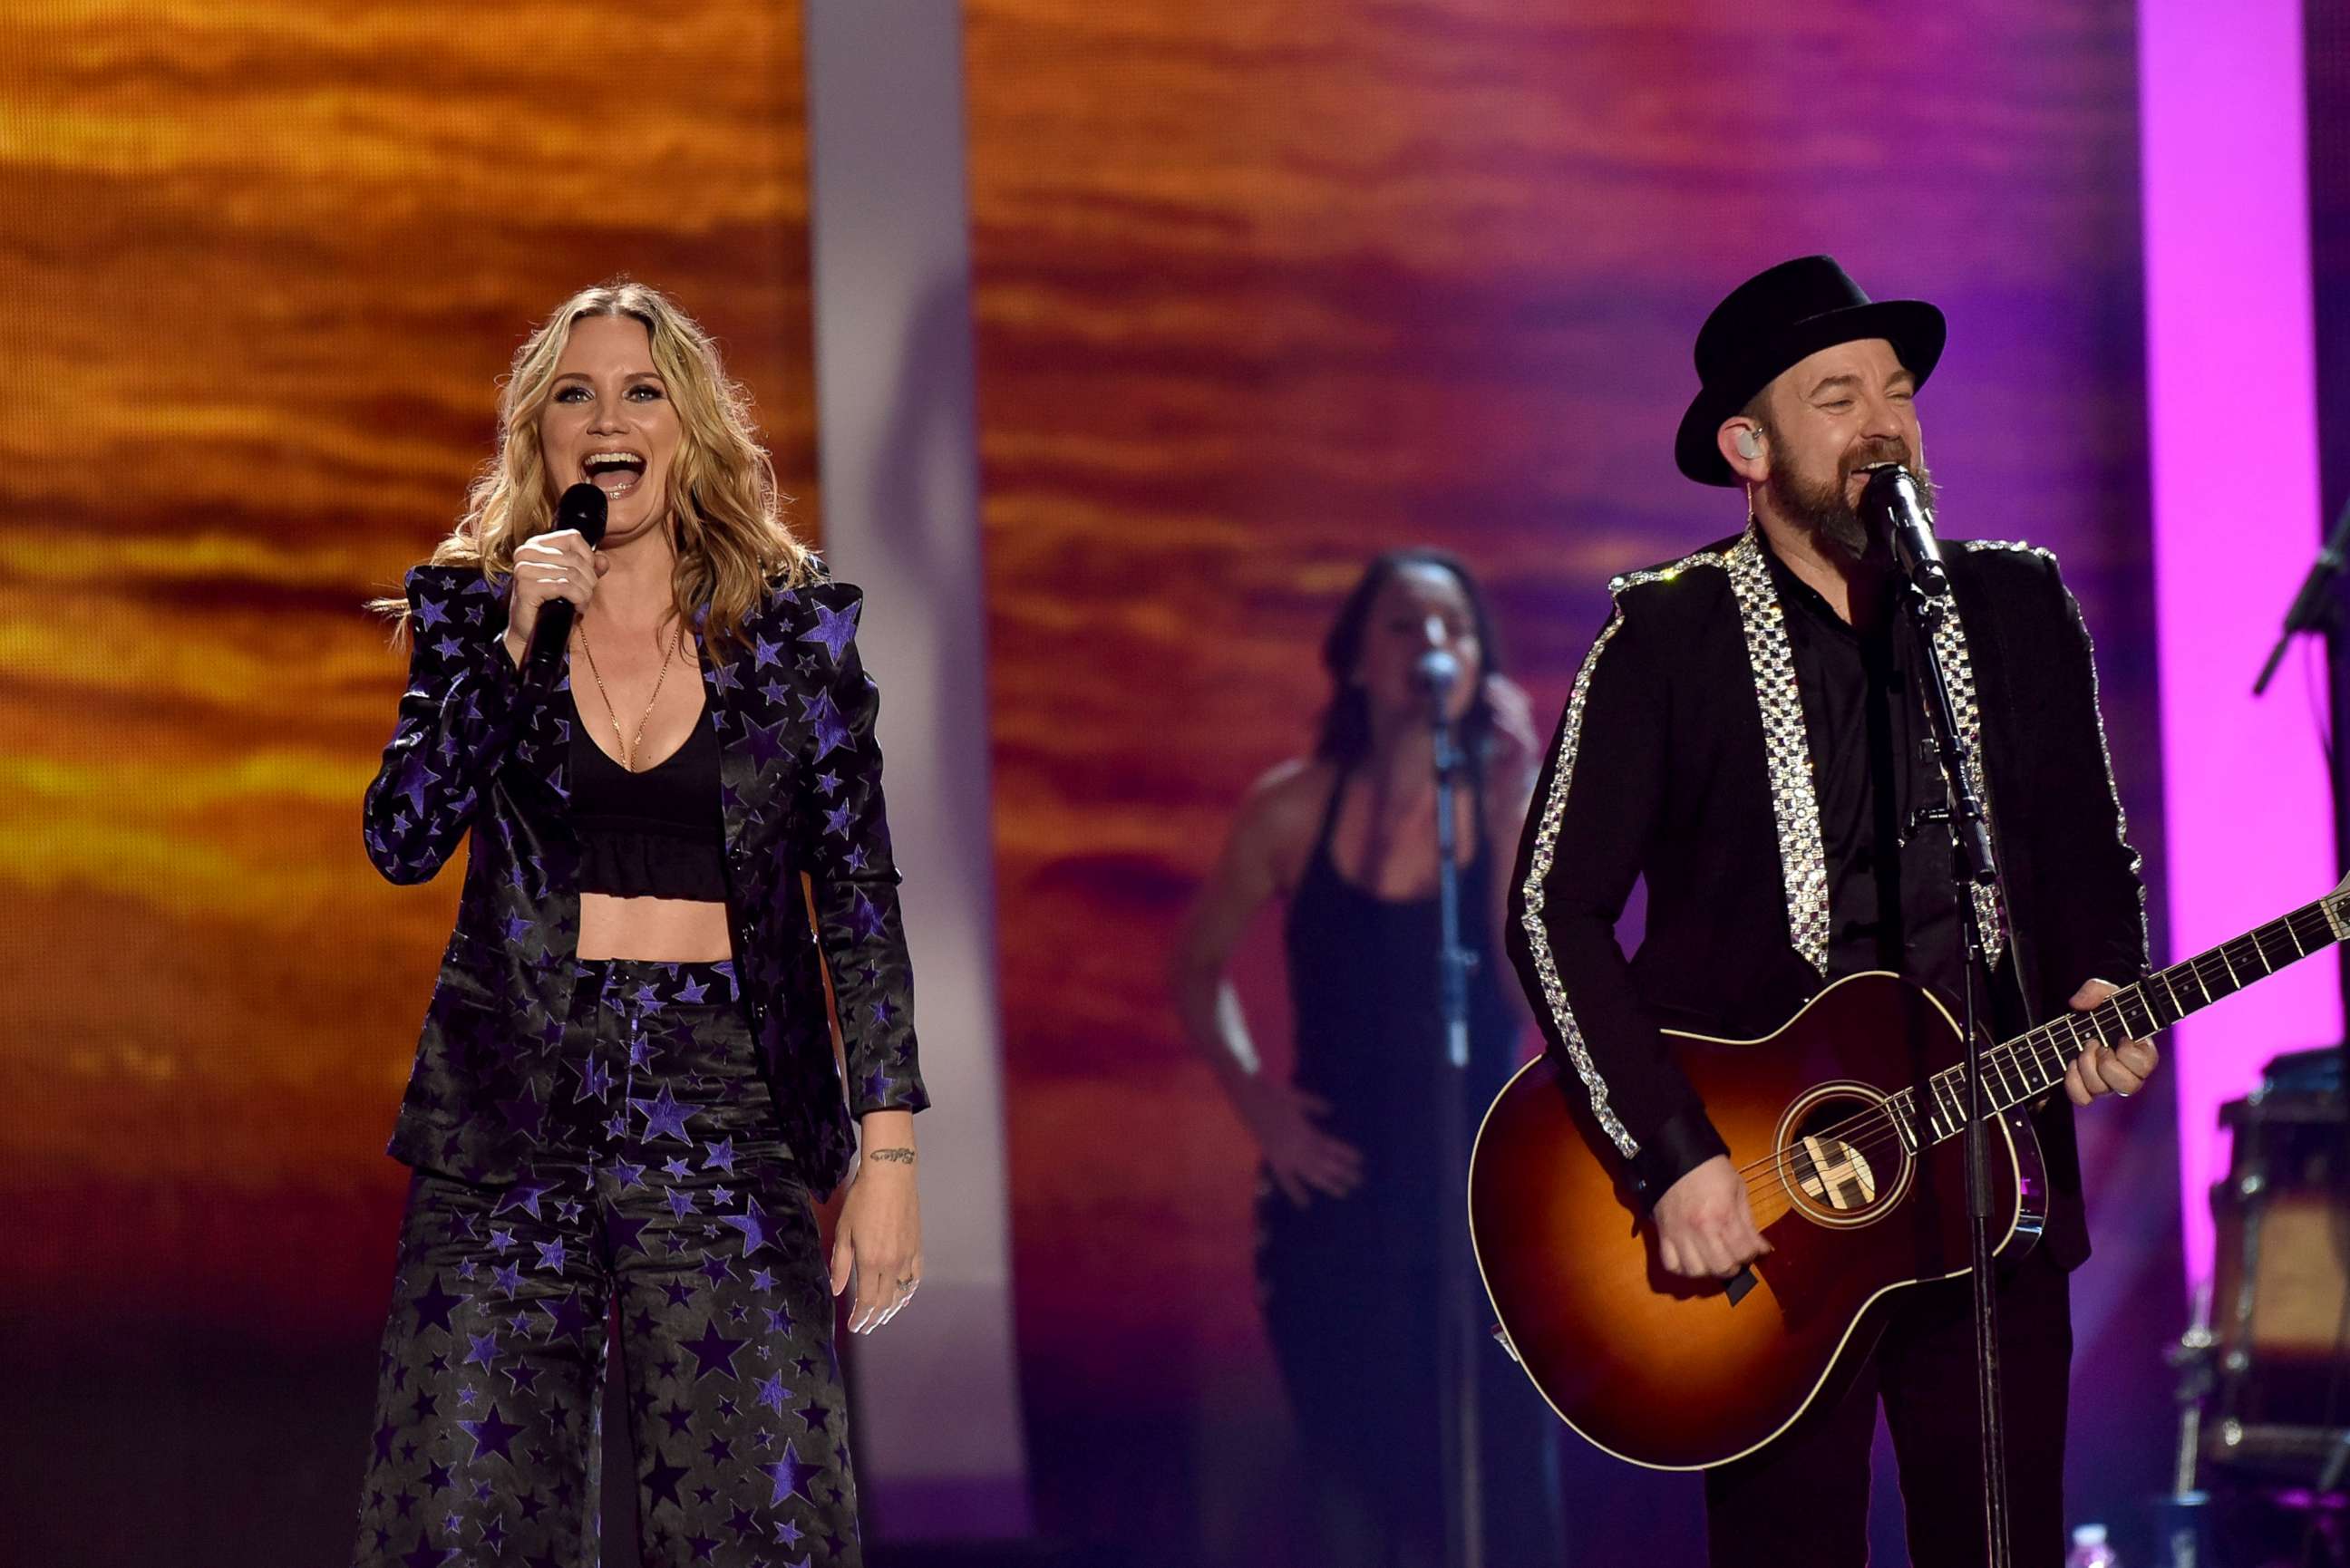 PHOTO: Jennifer Nettles and Kristian Bush of Sugarland perform during the 2018 iHeartCountry Festival by AT&T in Austin, Texas, May 5, 2018.